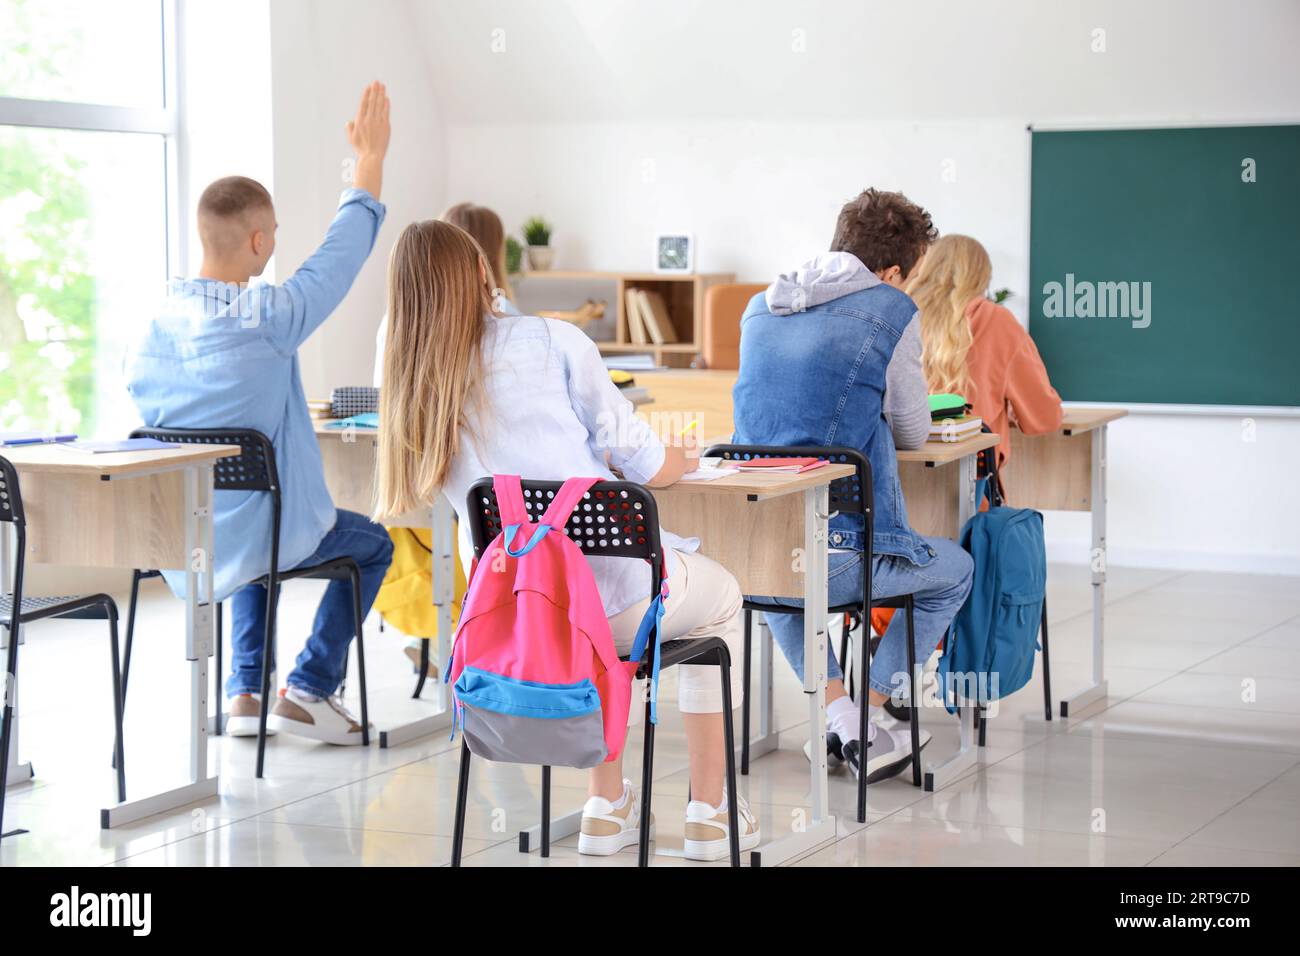 Male student raising hand to answer with his classmates in classroom Stock Photo